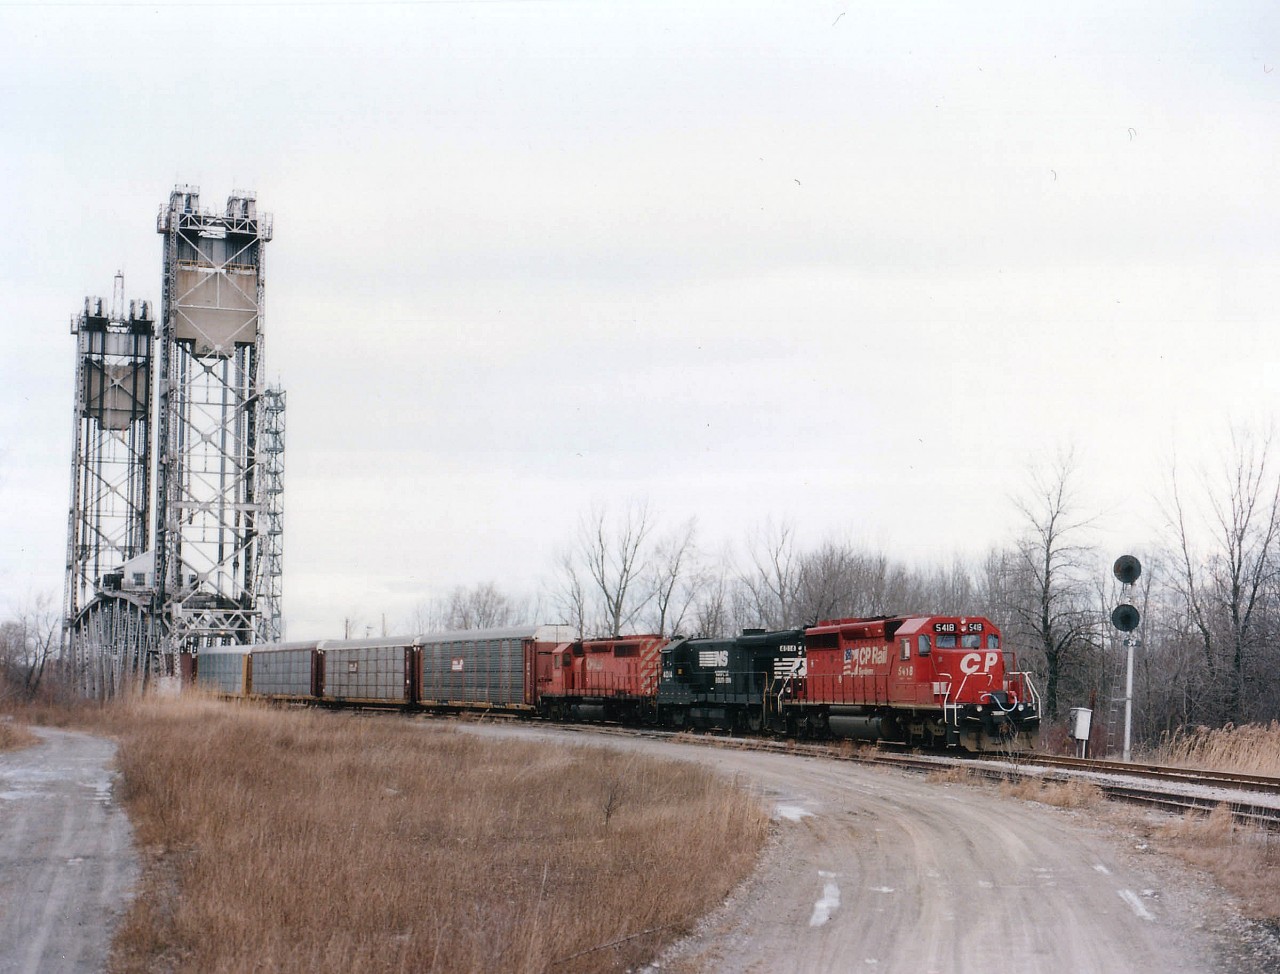 Due to bridge work on Bridge 6, the regular CN mainline bridge over the Welland Canal, trains approaching while a work block was in progress were rerouted via the Thorold Sub and bridge 10 to Port Robinson and onto the CN Stamford Sub., bypassing Niagara Falls altogether. I'm not aware as to how many trains did this route, but I noted four #328s between Nov 27/96 and Jan 22/97. I heard of no CNs going this way. And the detours were only sporadic, as after the first on Nov 27th, I noted Dec 4,5 and 6 (as well as many other #328s) going the regular route thru Niagara Falls. So the Thorold run would come under 'rare mileage'. Especially for anything other than CN. I understand maintenance and repair costs excessive, the bridge 10 shown here was dismantled by the Seaway Authority not long after this photo was taken. Power is CP 5418, NS 4014 (B23-7) and CP 5600.